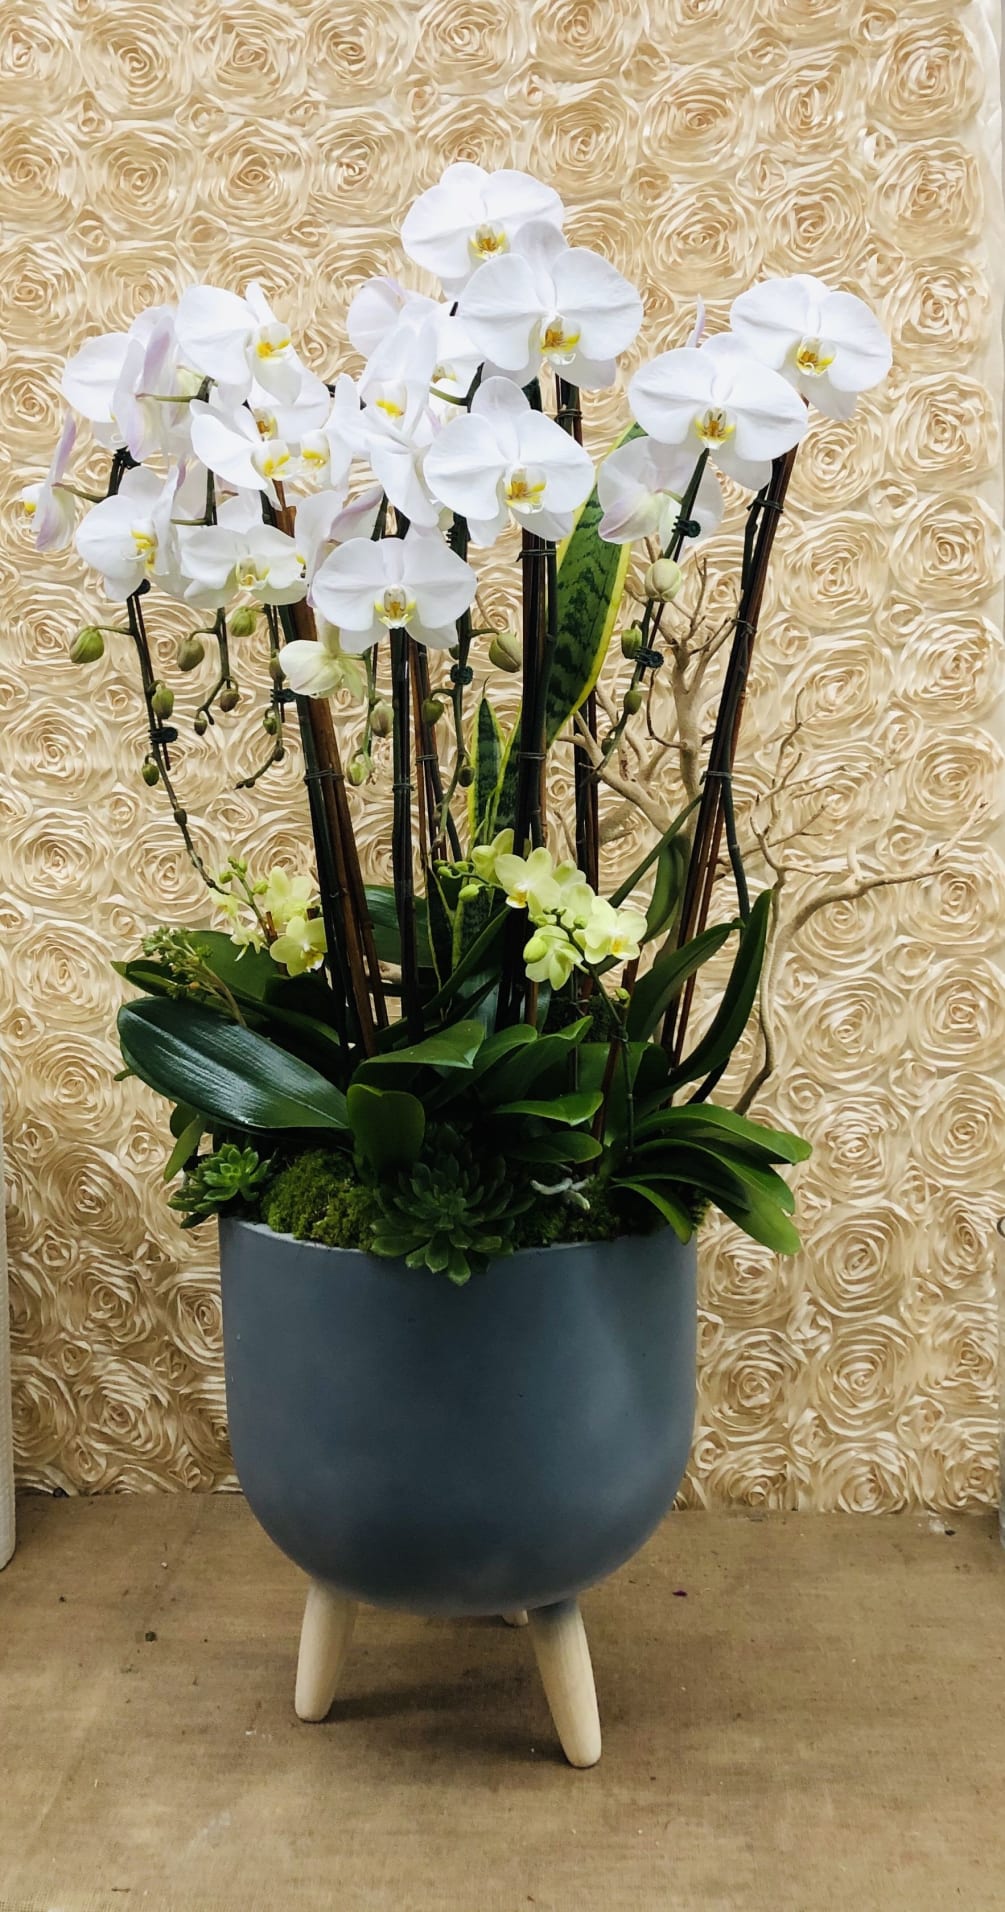 A beautiful arrangement with white orchid plants that will bring a smile